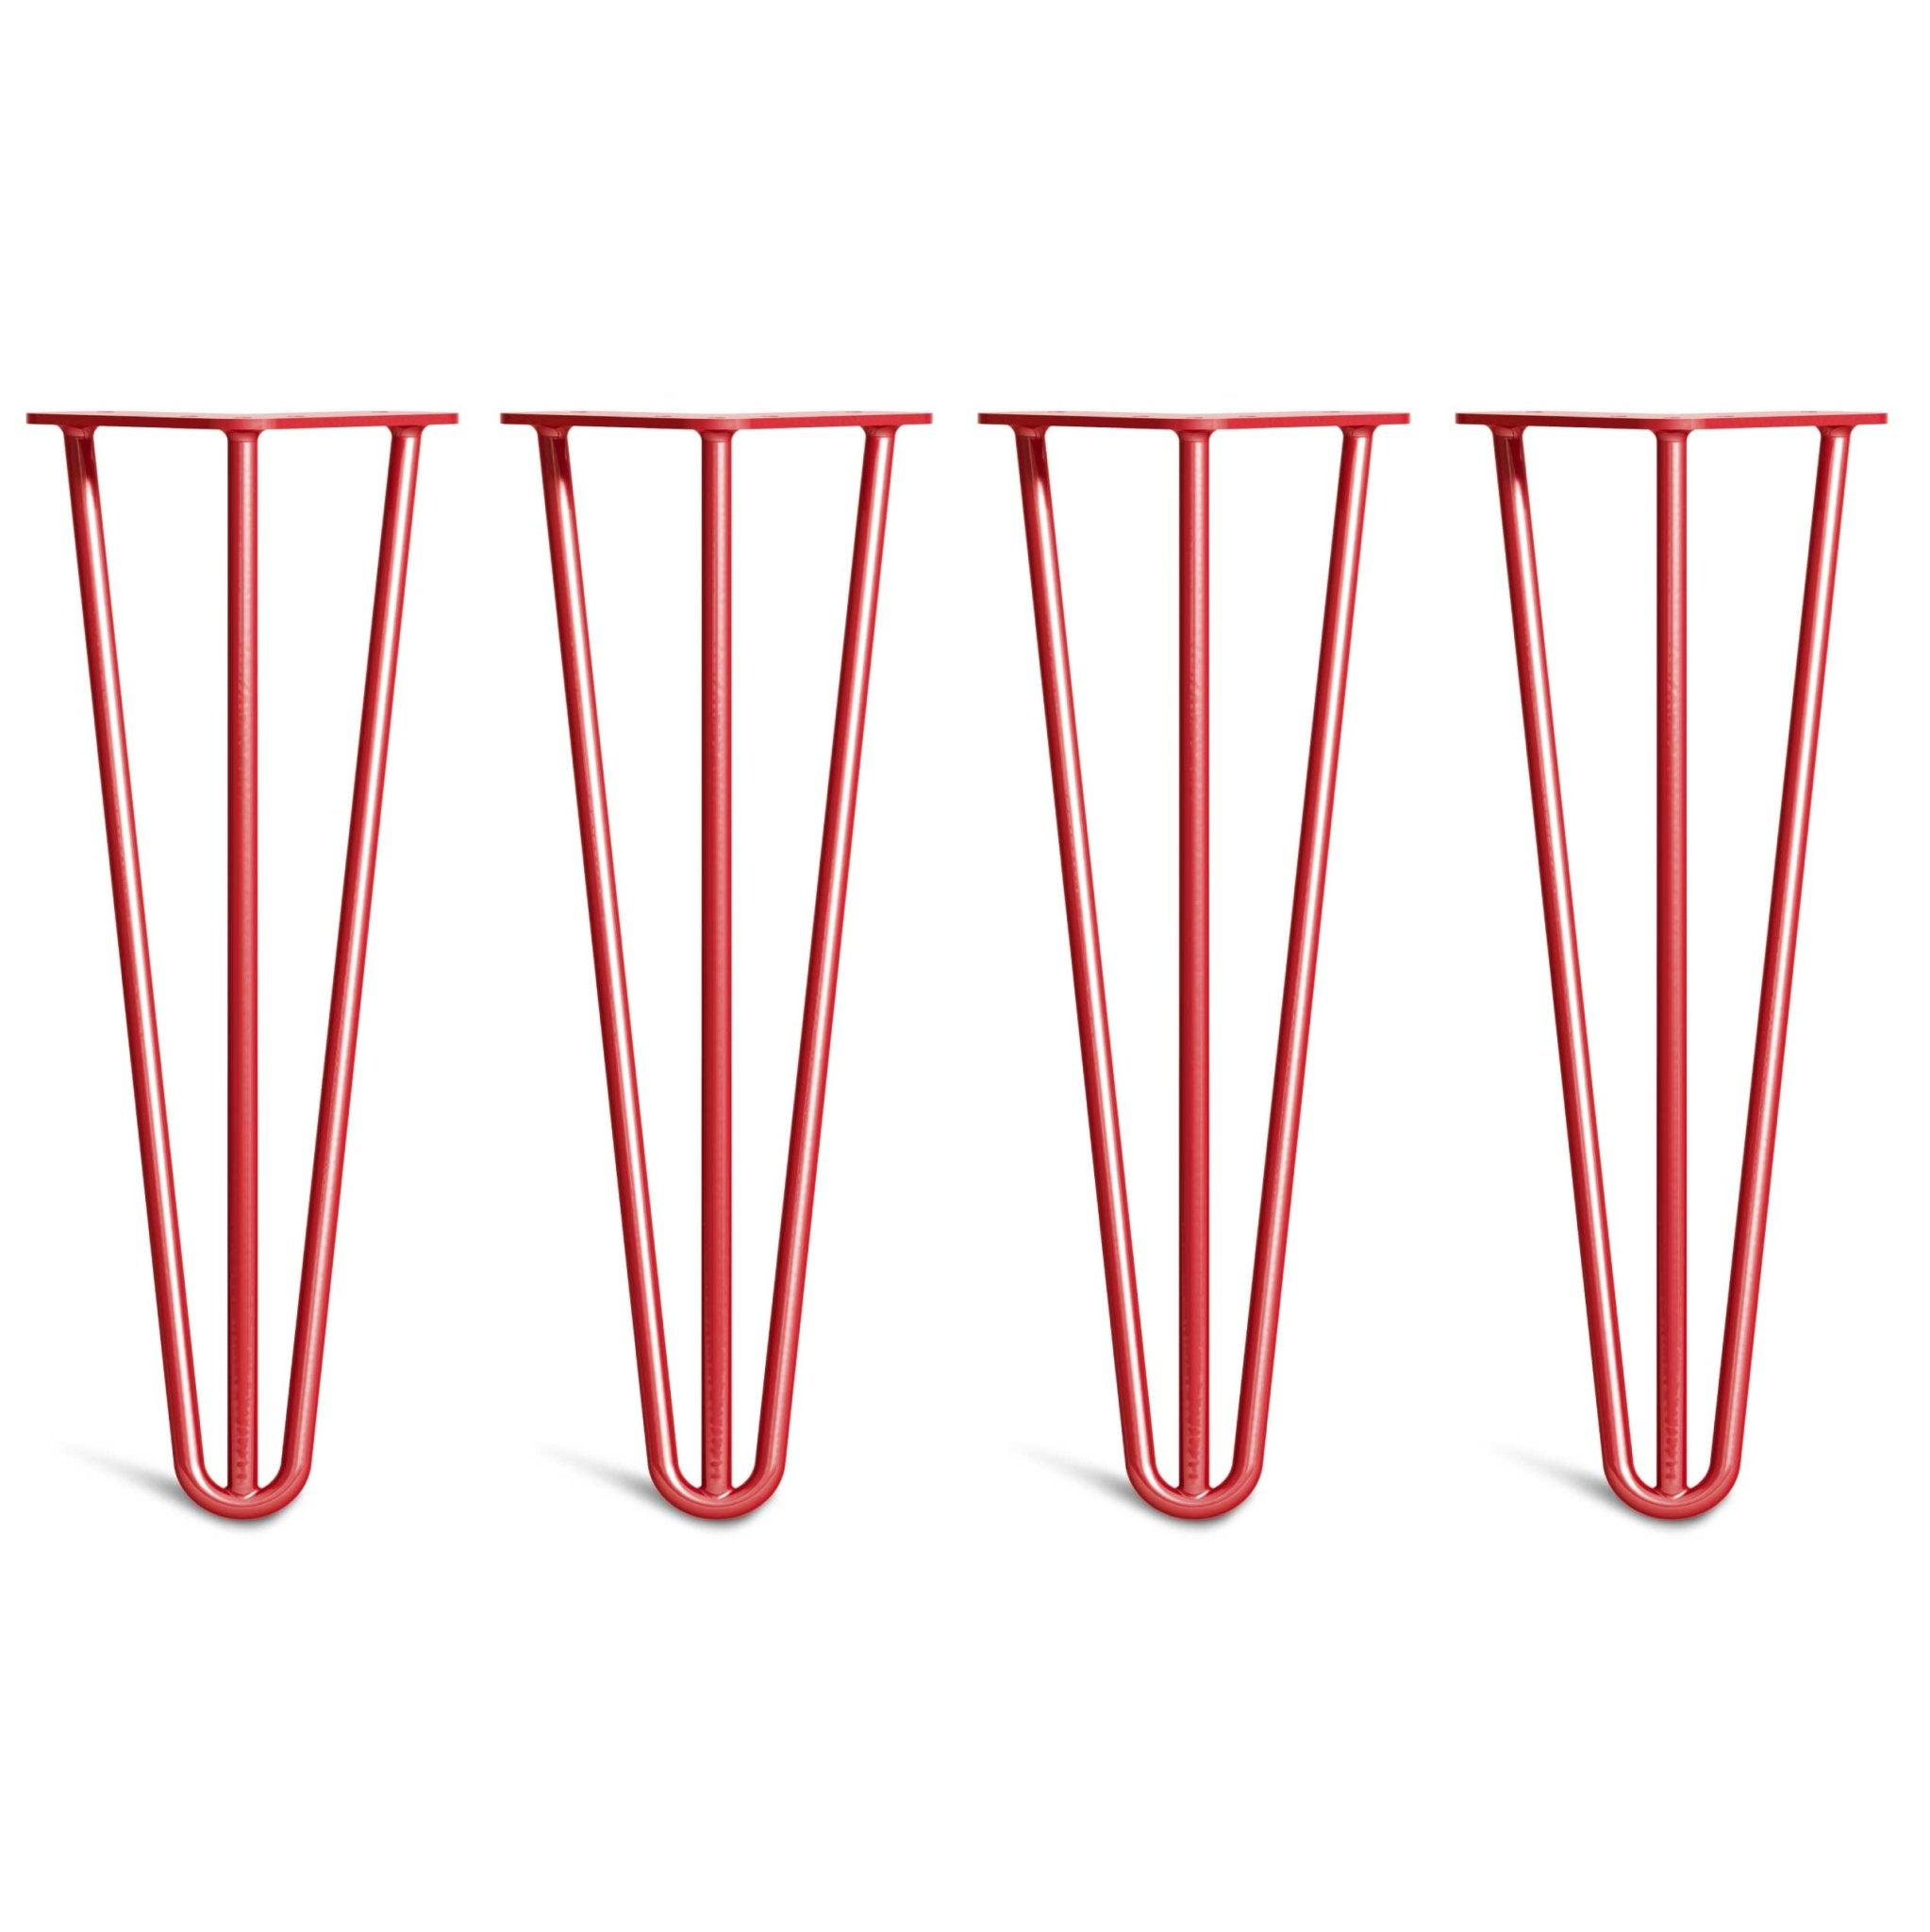 35cm Hairpin Legs - Coffee Table-3 Rod-Red-The Hairpin Leg Co.